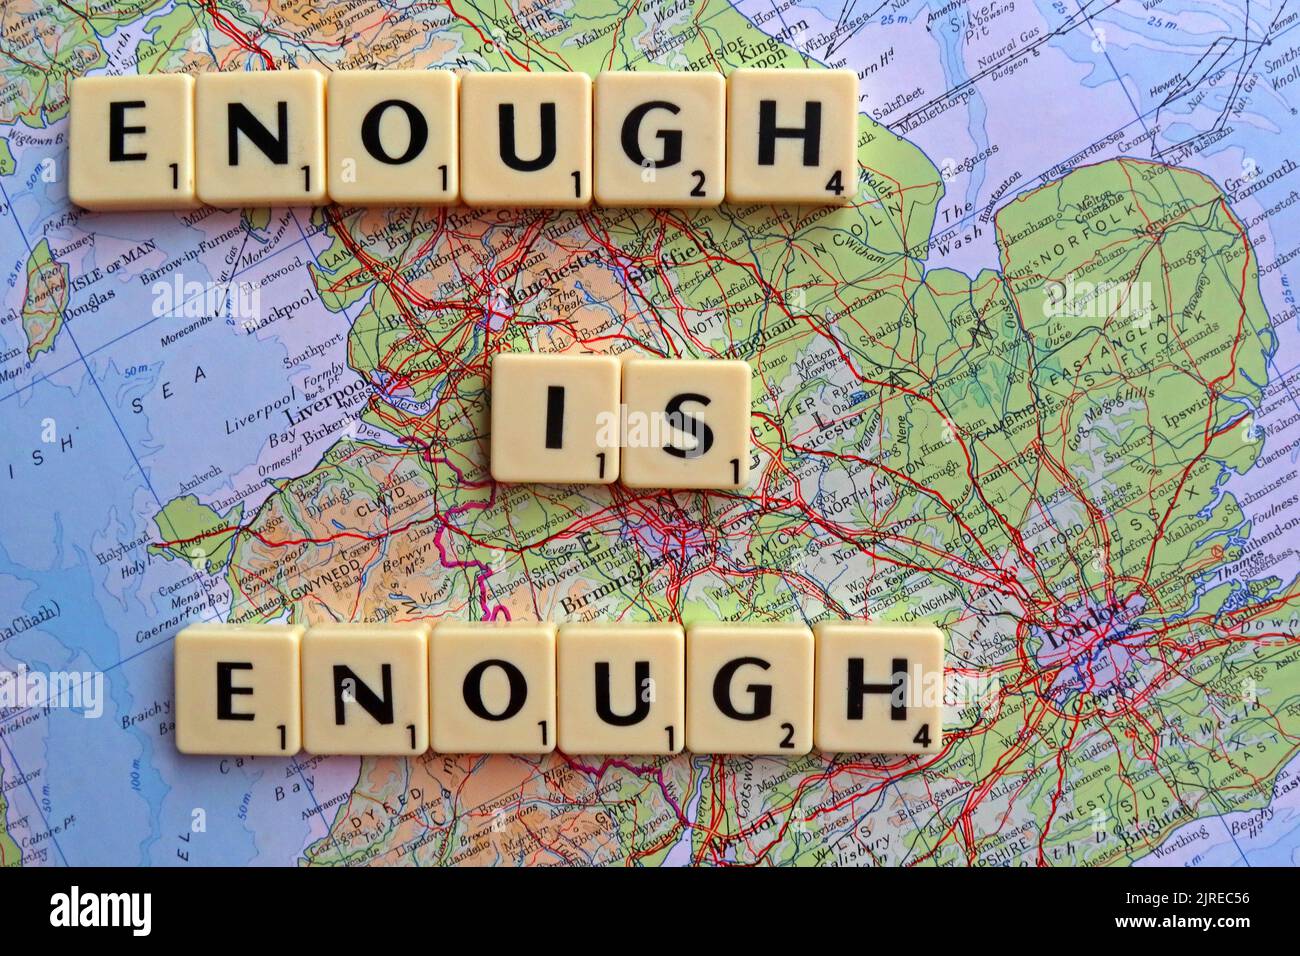 Enough Is Enough, scrabble letters on a map of the UK Stock Photo